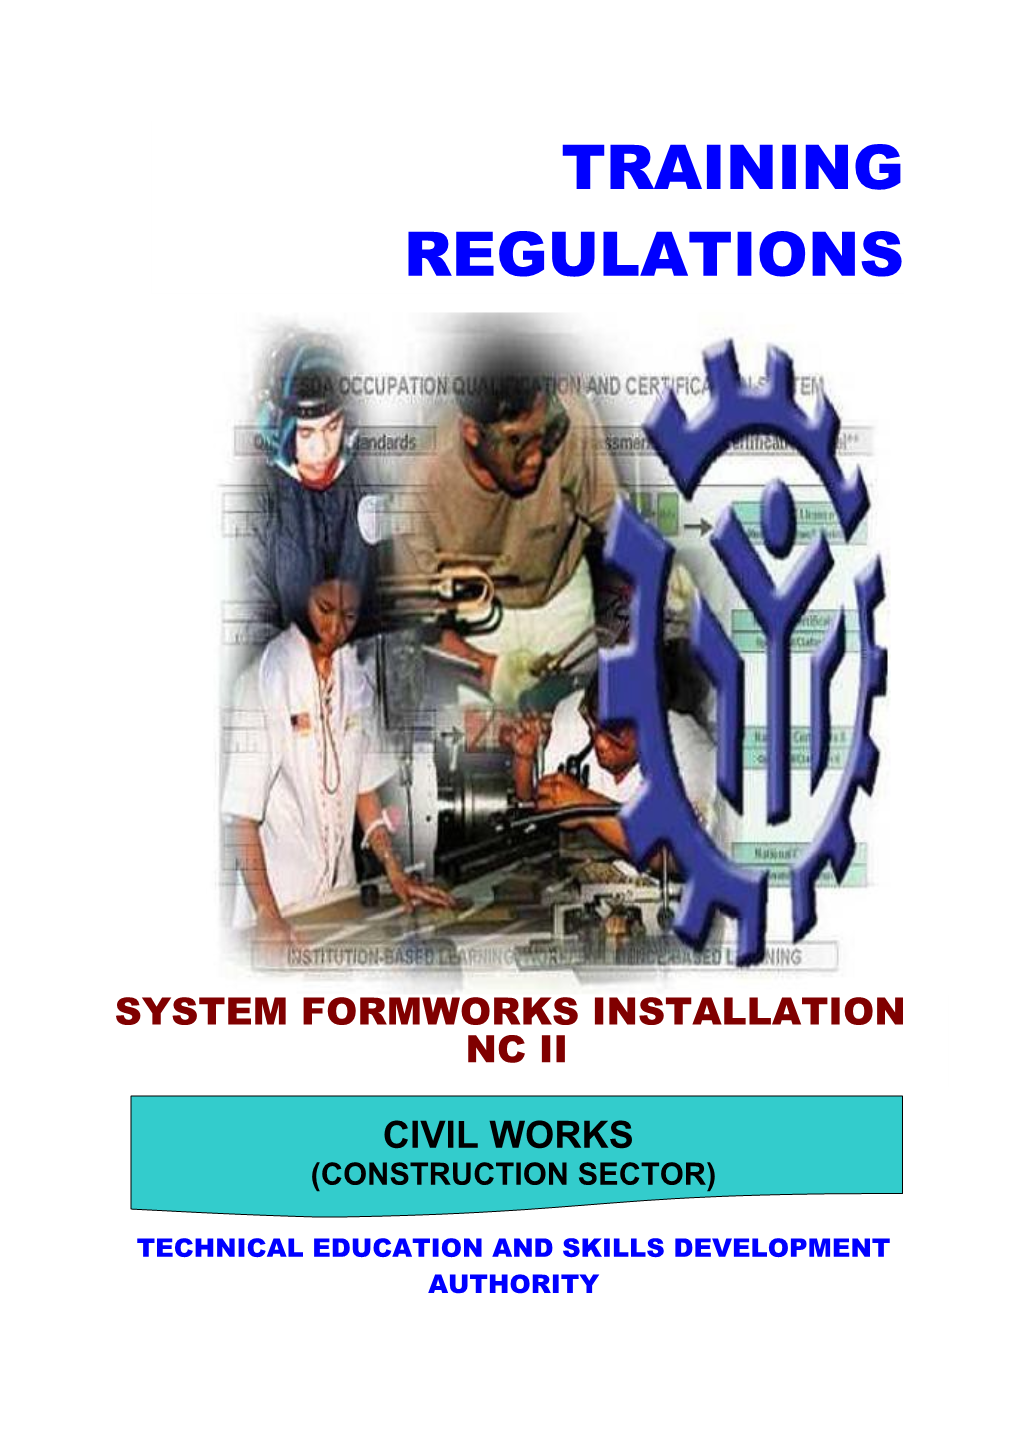 Section 1. SYSTEM FORMWORKS INSTALLATION NC II QUALIFICATION